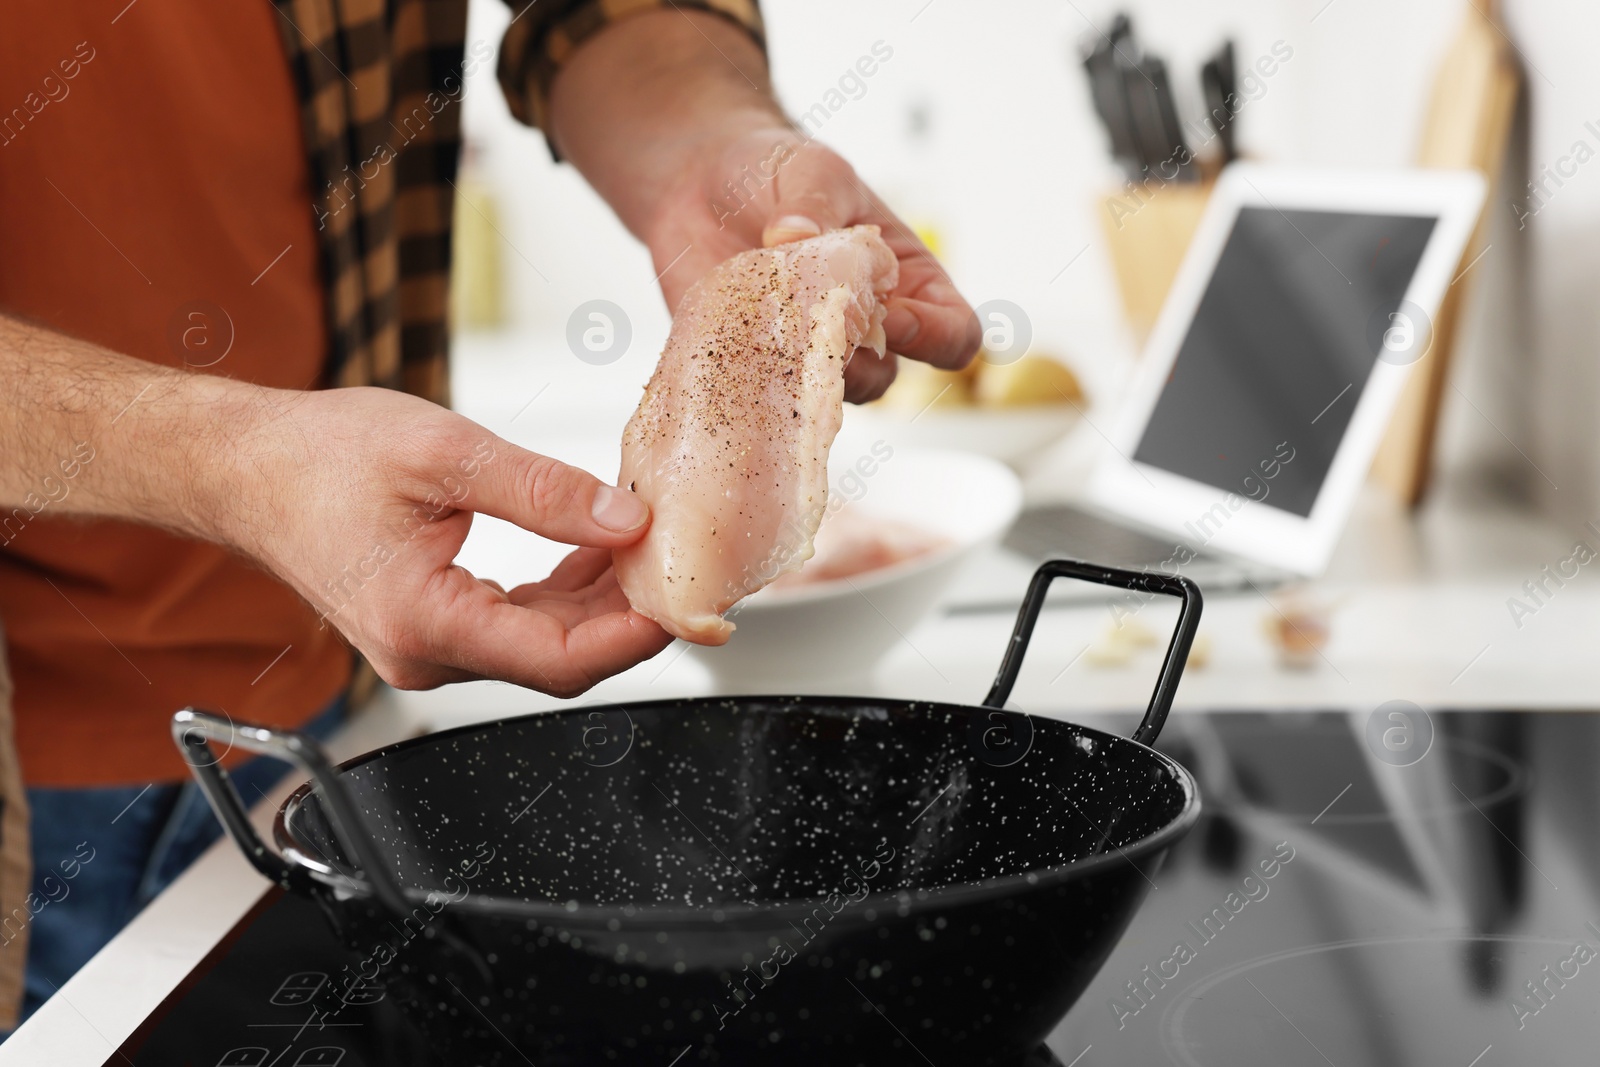 Photo of Man putting chicken fillet into frying pan while watching online cooking course via laptop in kitchen, closeup